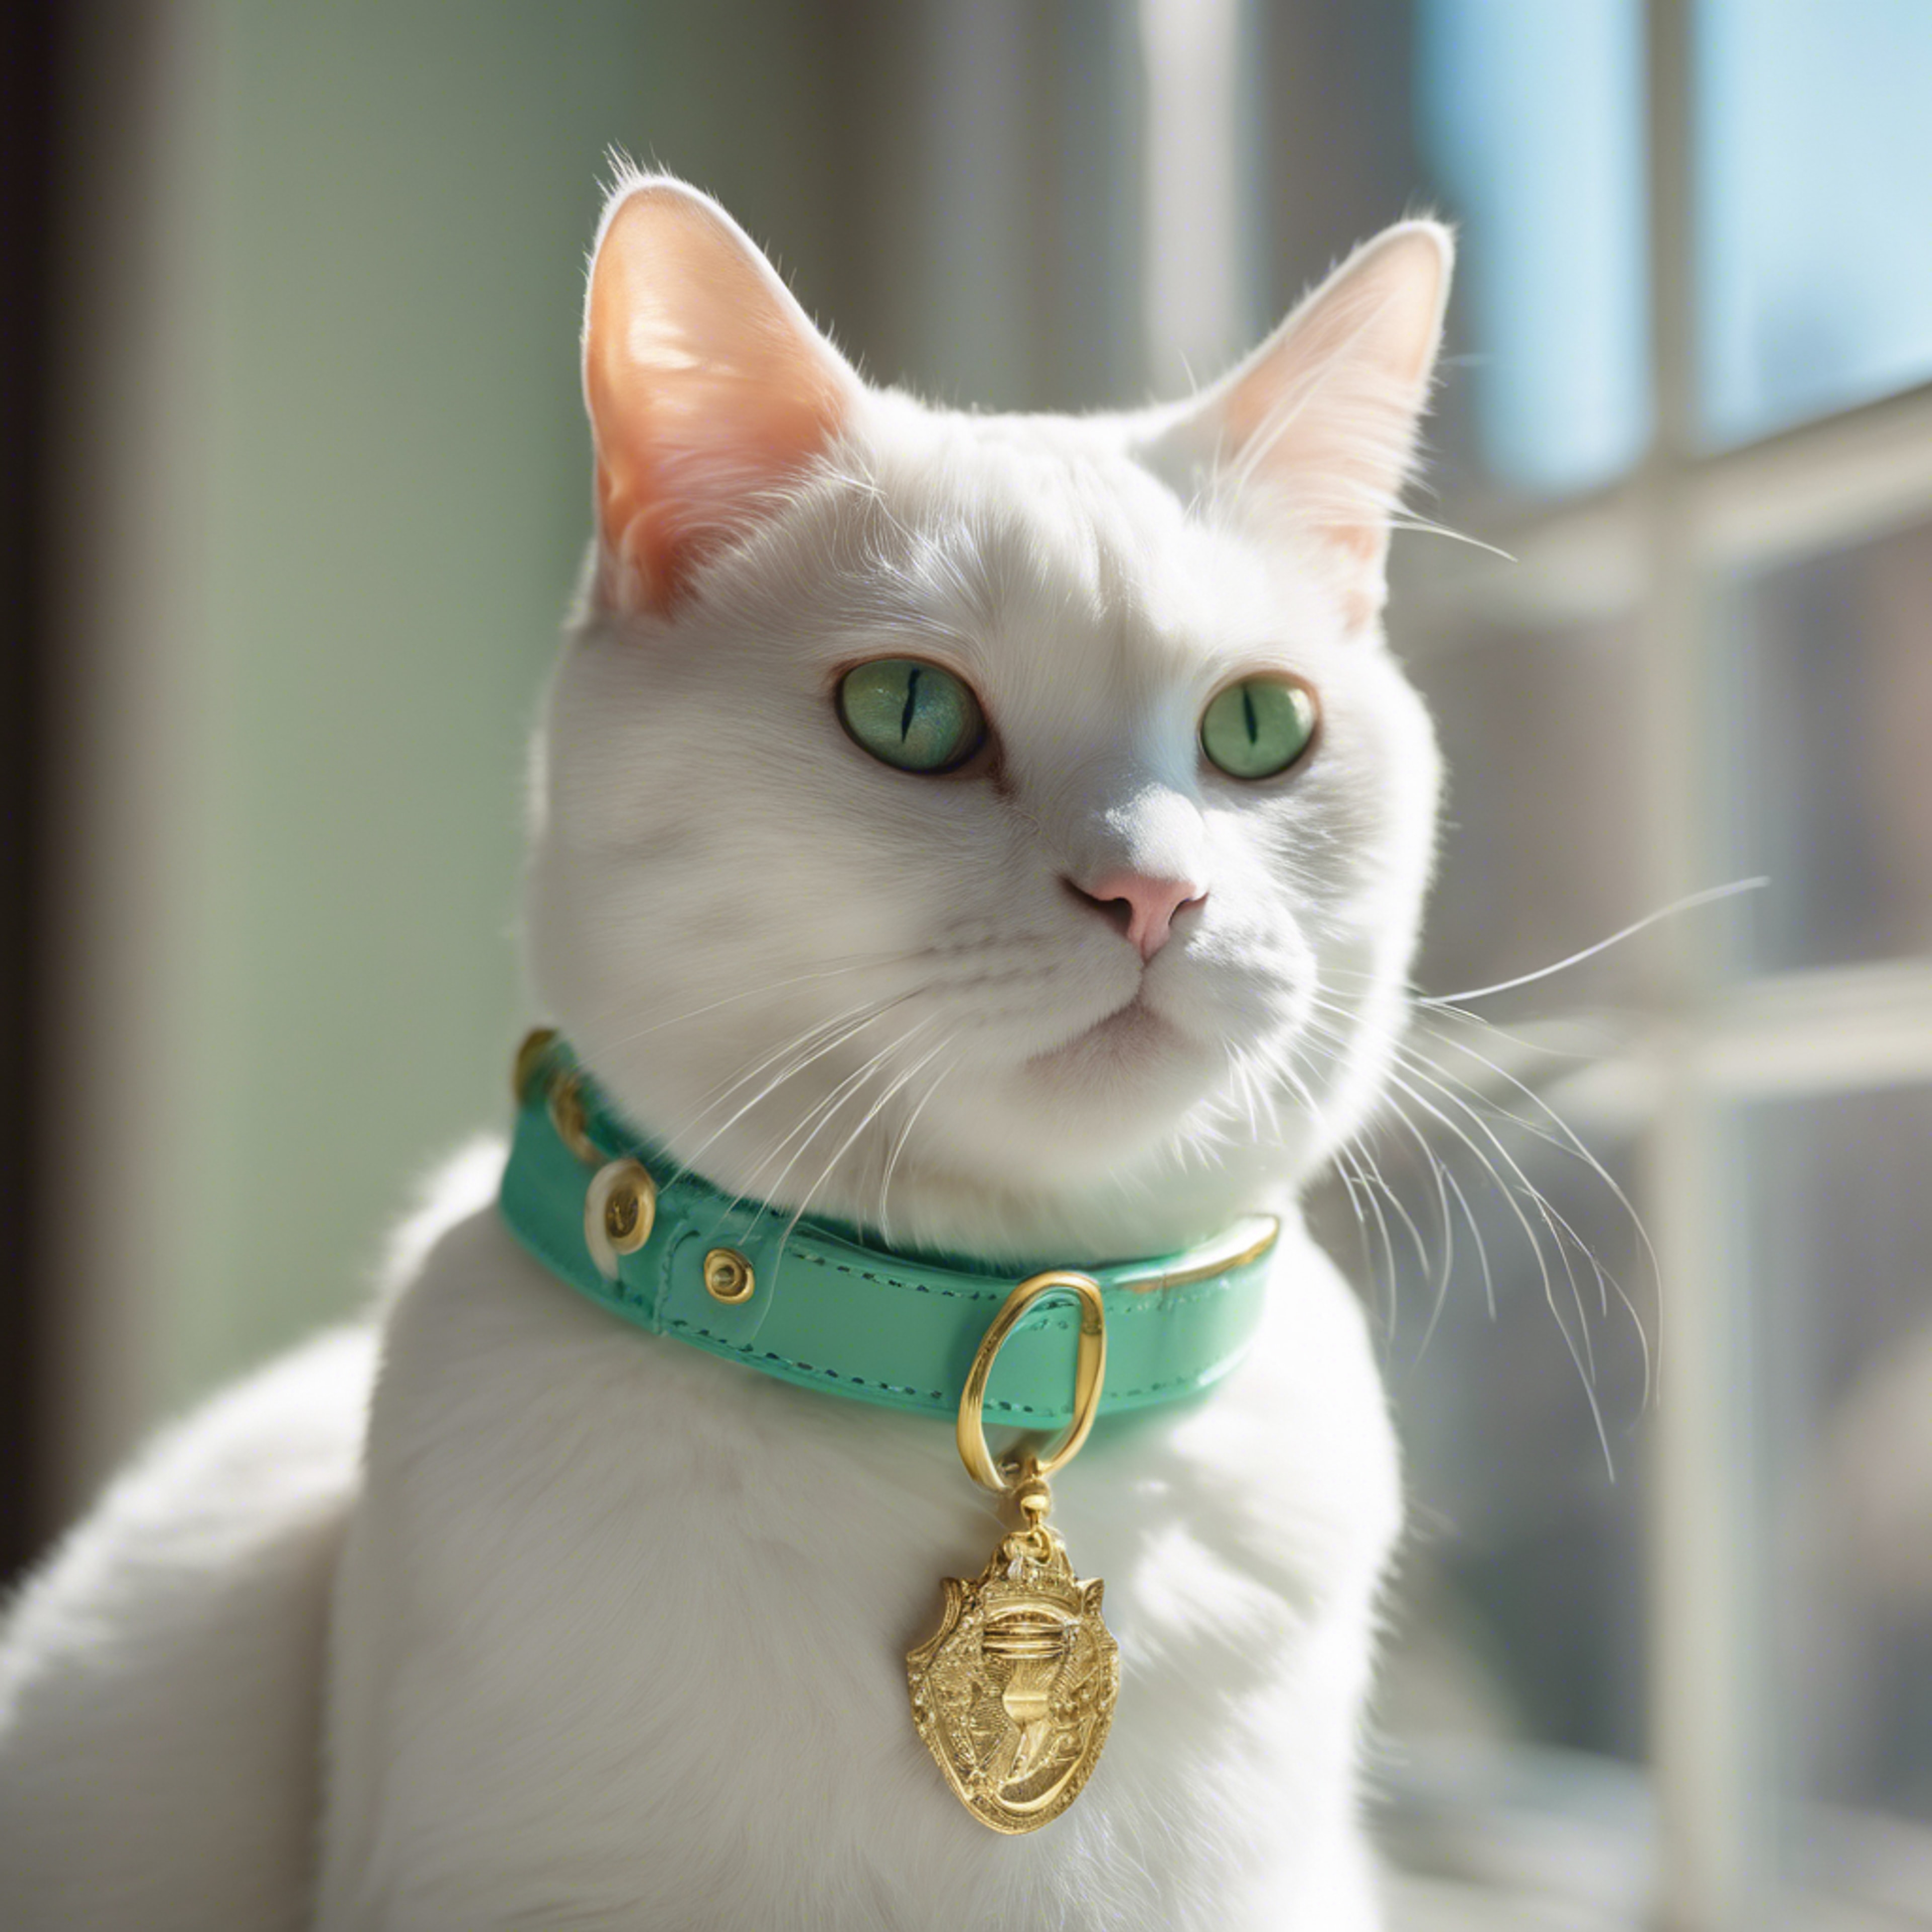 An adorable white cat wearing a preppy mint green collar with a gold buckle sitting in a sunny window. Tapeta[8de0351476e04873aa5e]